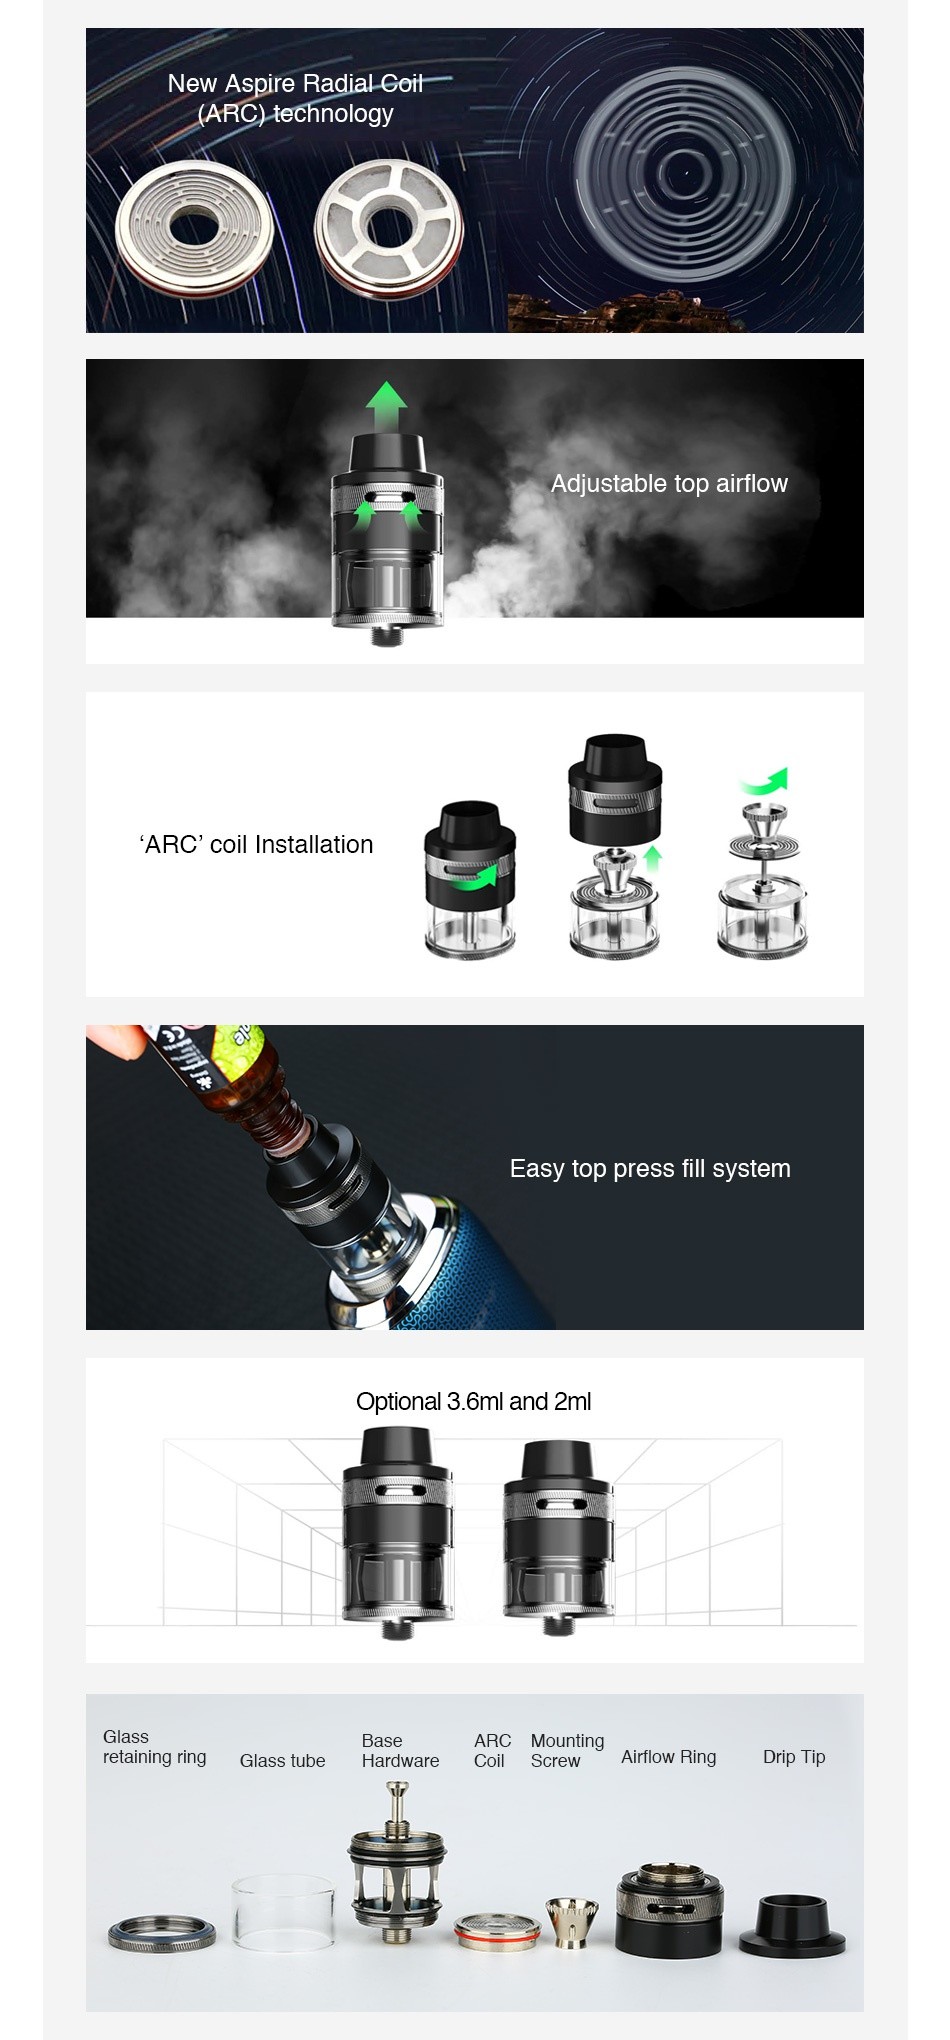 Aspire Revvo ARC Subohm Tank 3.6ml/2ml New Aspire RadialcoiF  ARC technology Adjustable top airflow ARC coIL Installation Easy top press fill system Optional 3 6ml and 2ml Glass ARC Mounting retaining ri lass tube Hardware Coil Screw Airflow Ring Drip lIp